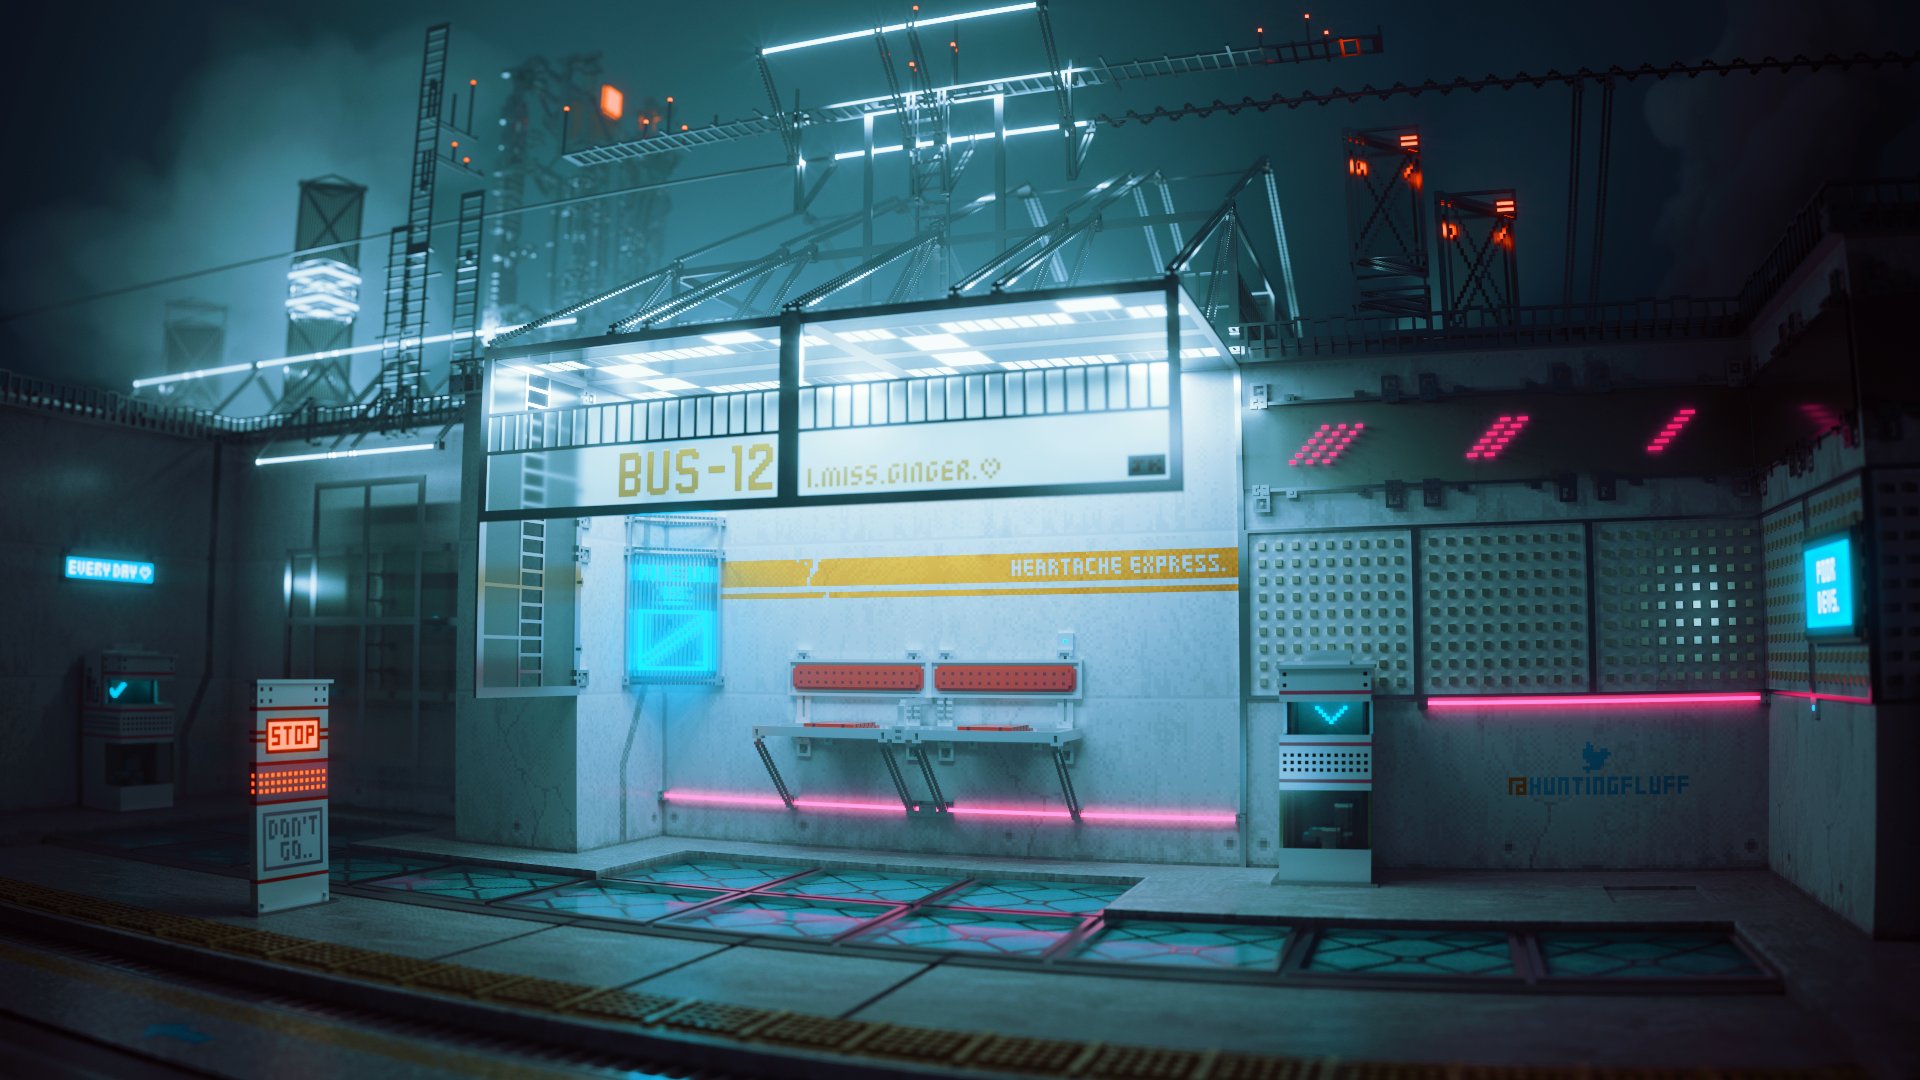 magicavoxel background image